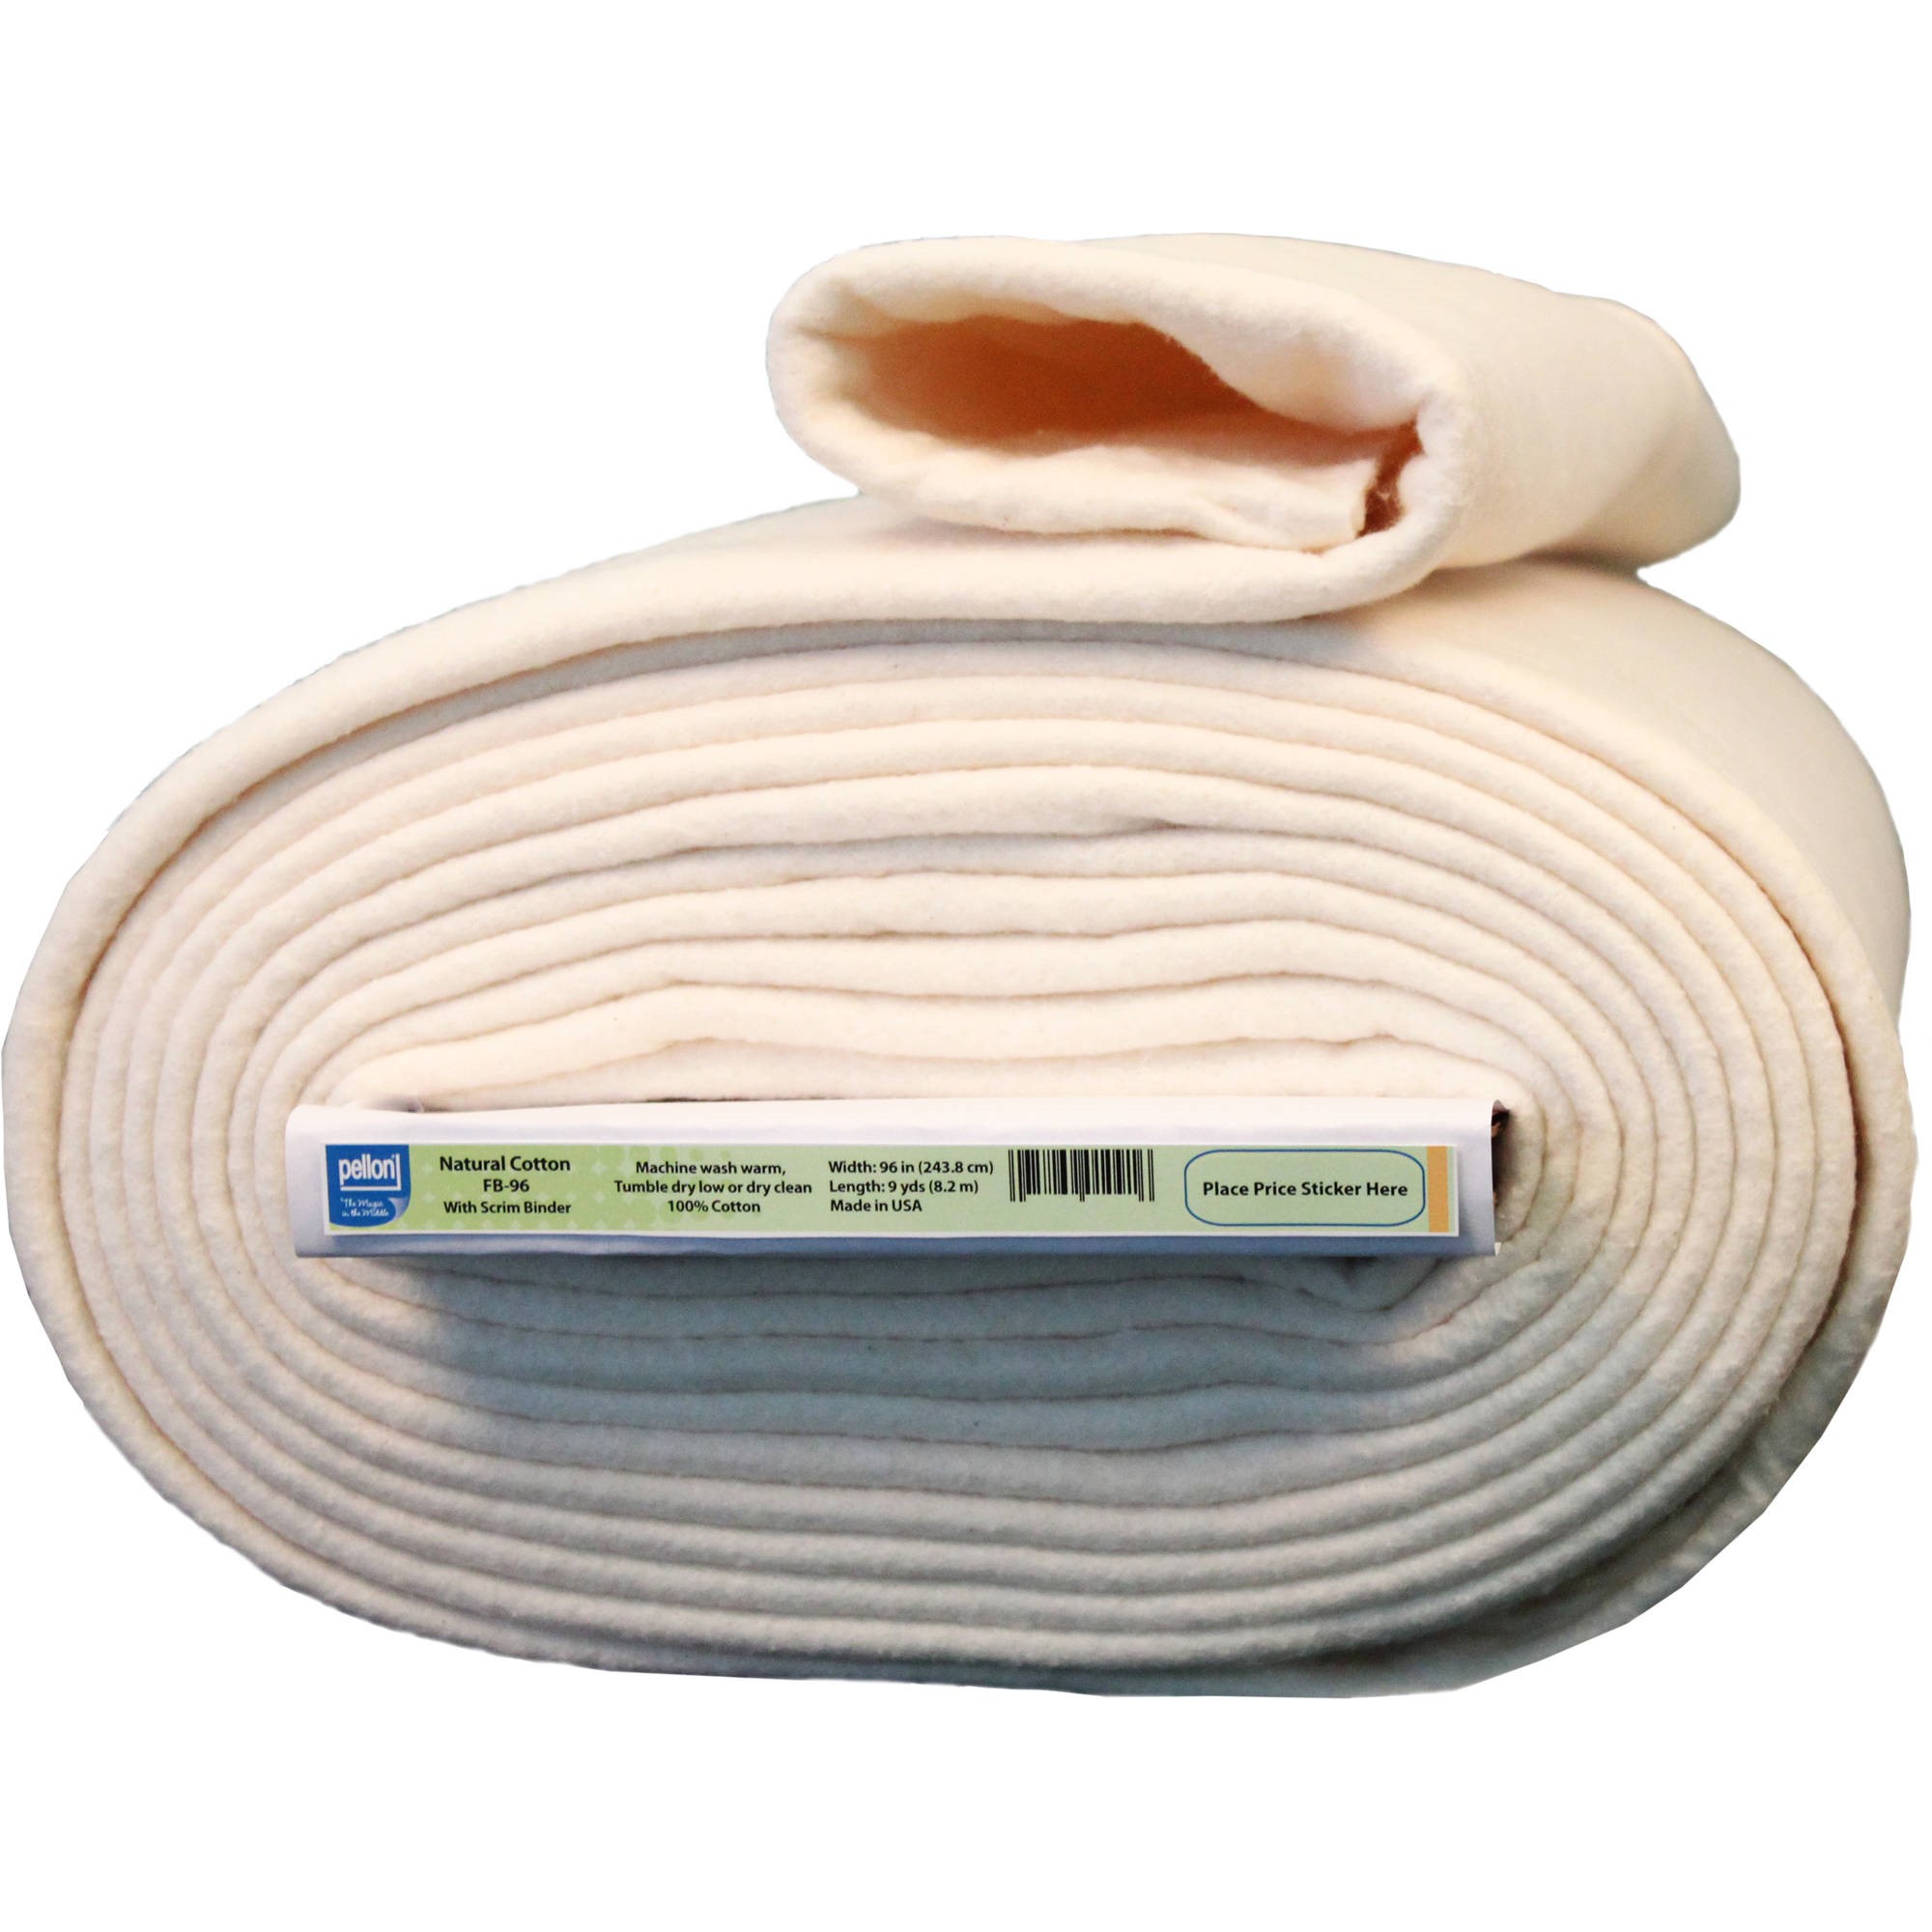 Pellon Natural Cotton Batting, off-White 96" x 9 Yards by the Bolt - image 1 of 6